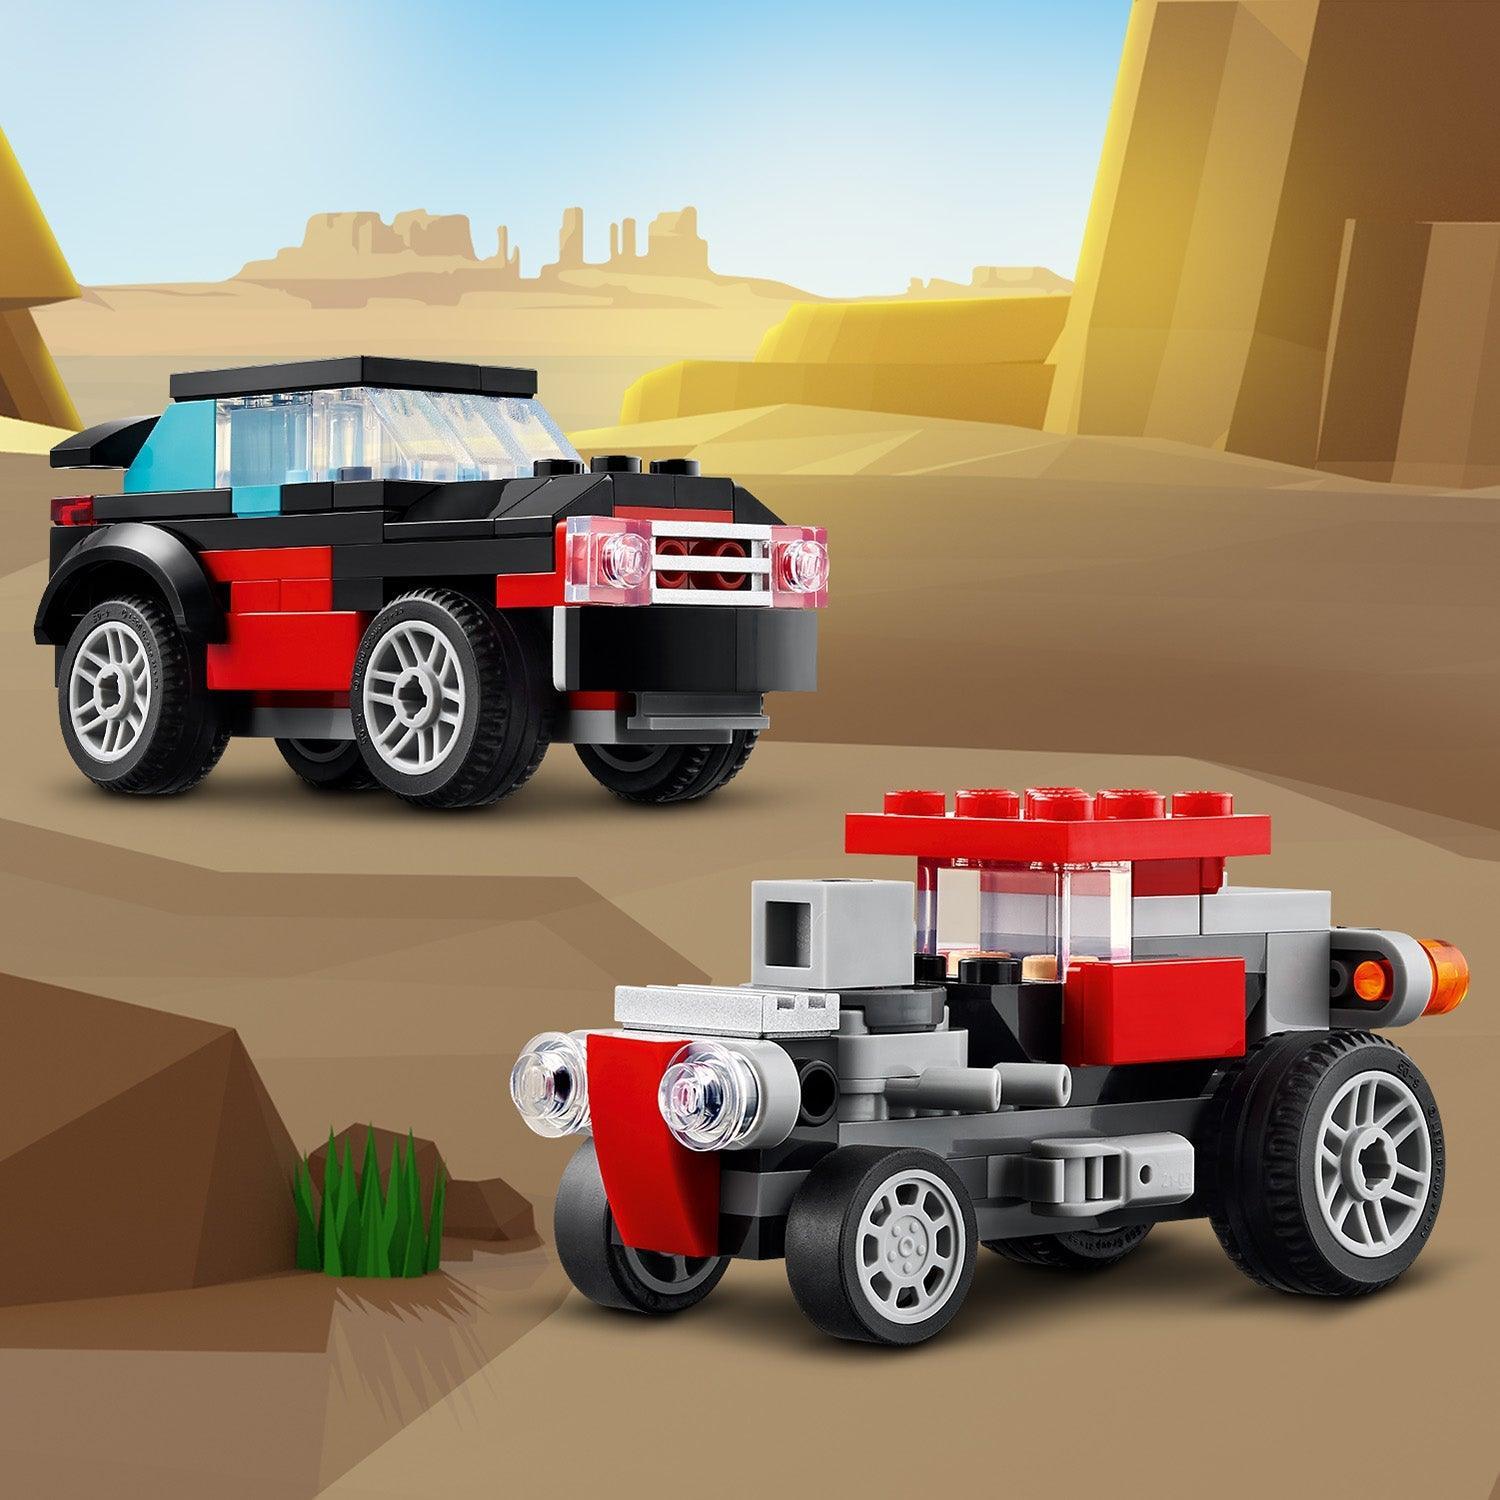 LEGO Flatbed Truck with Helicopter 31146 Creator 3 in 1 LEGO CREATOR 3 IN 1 @ 2TTOYS LEGO €. 19.99